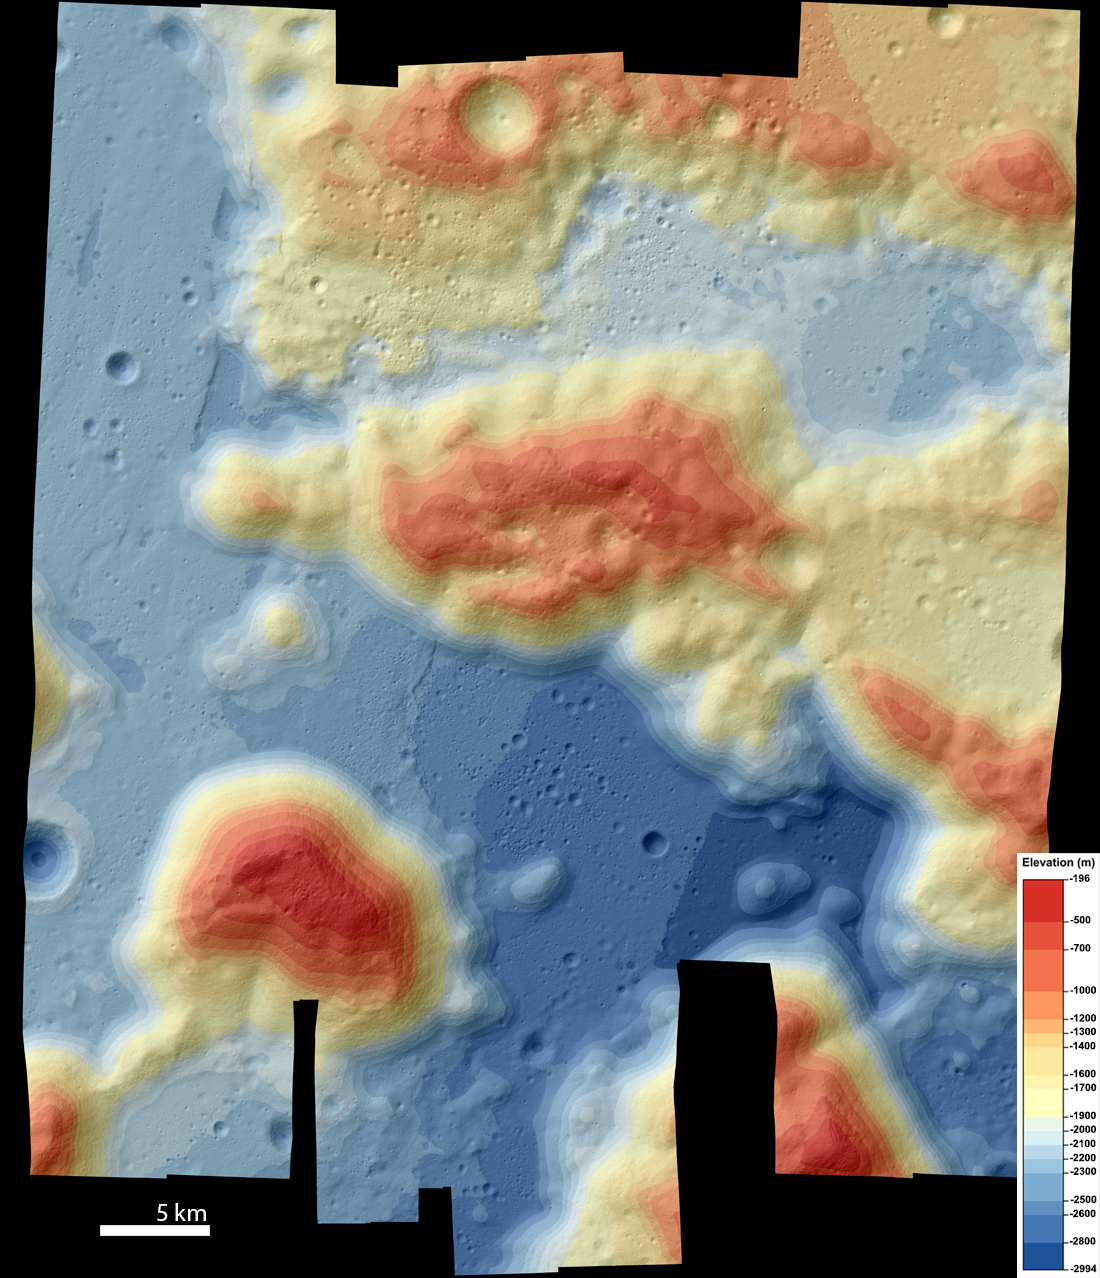 Topography of the Taurus-Littrow Valley